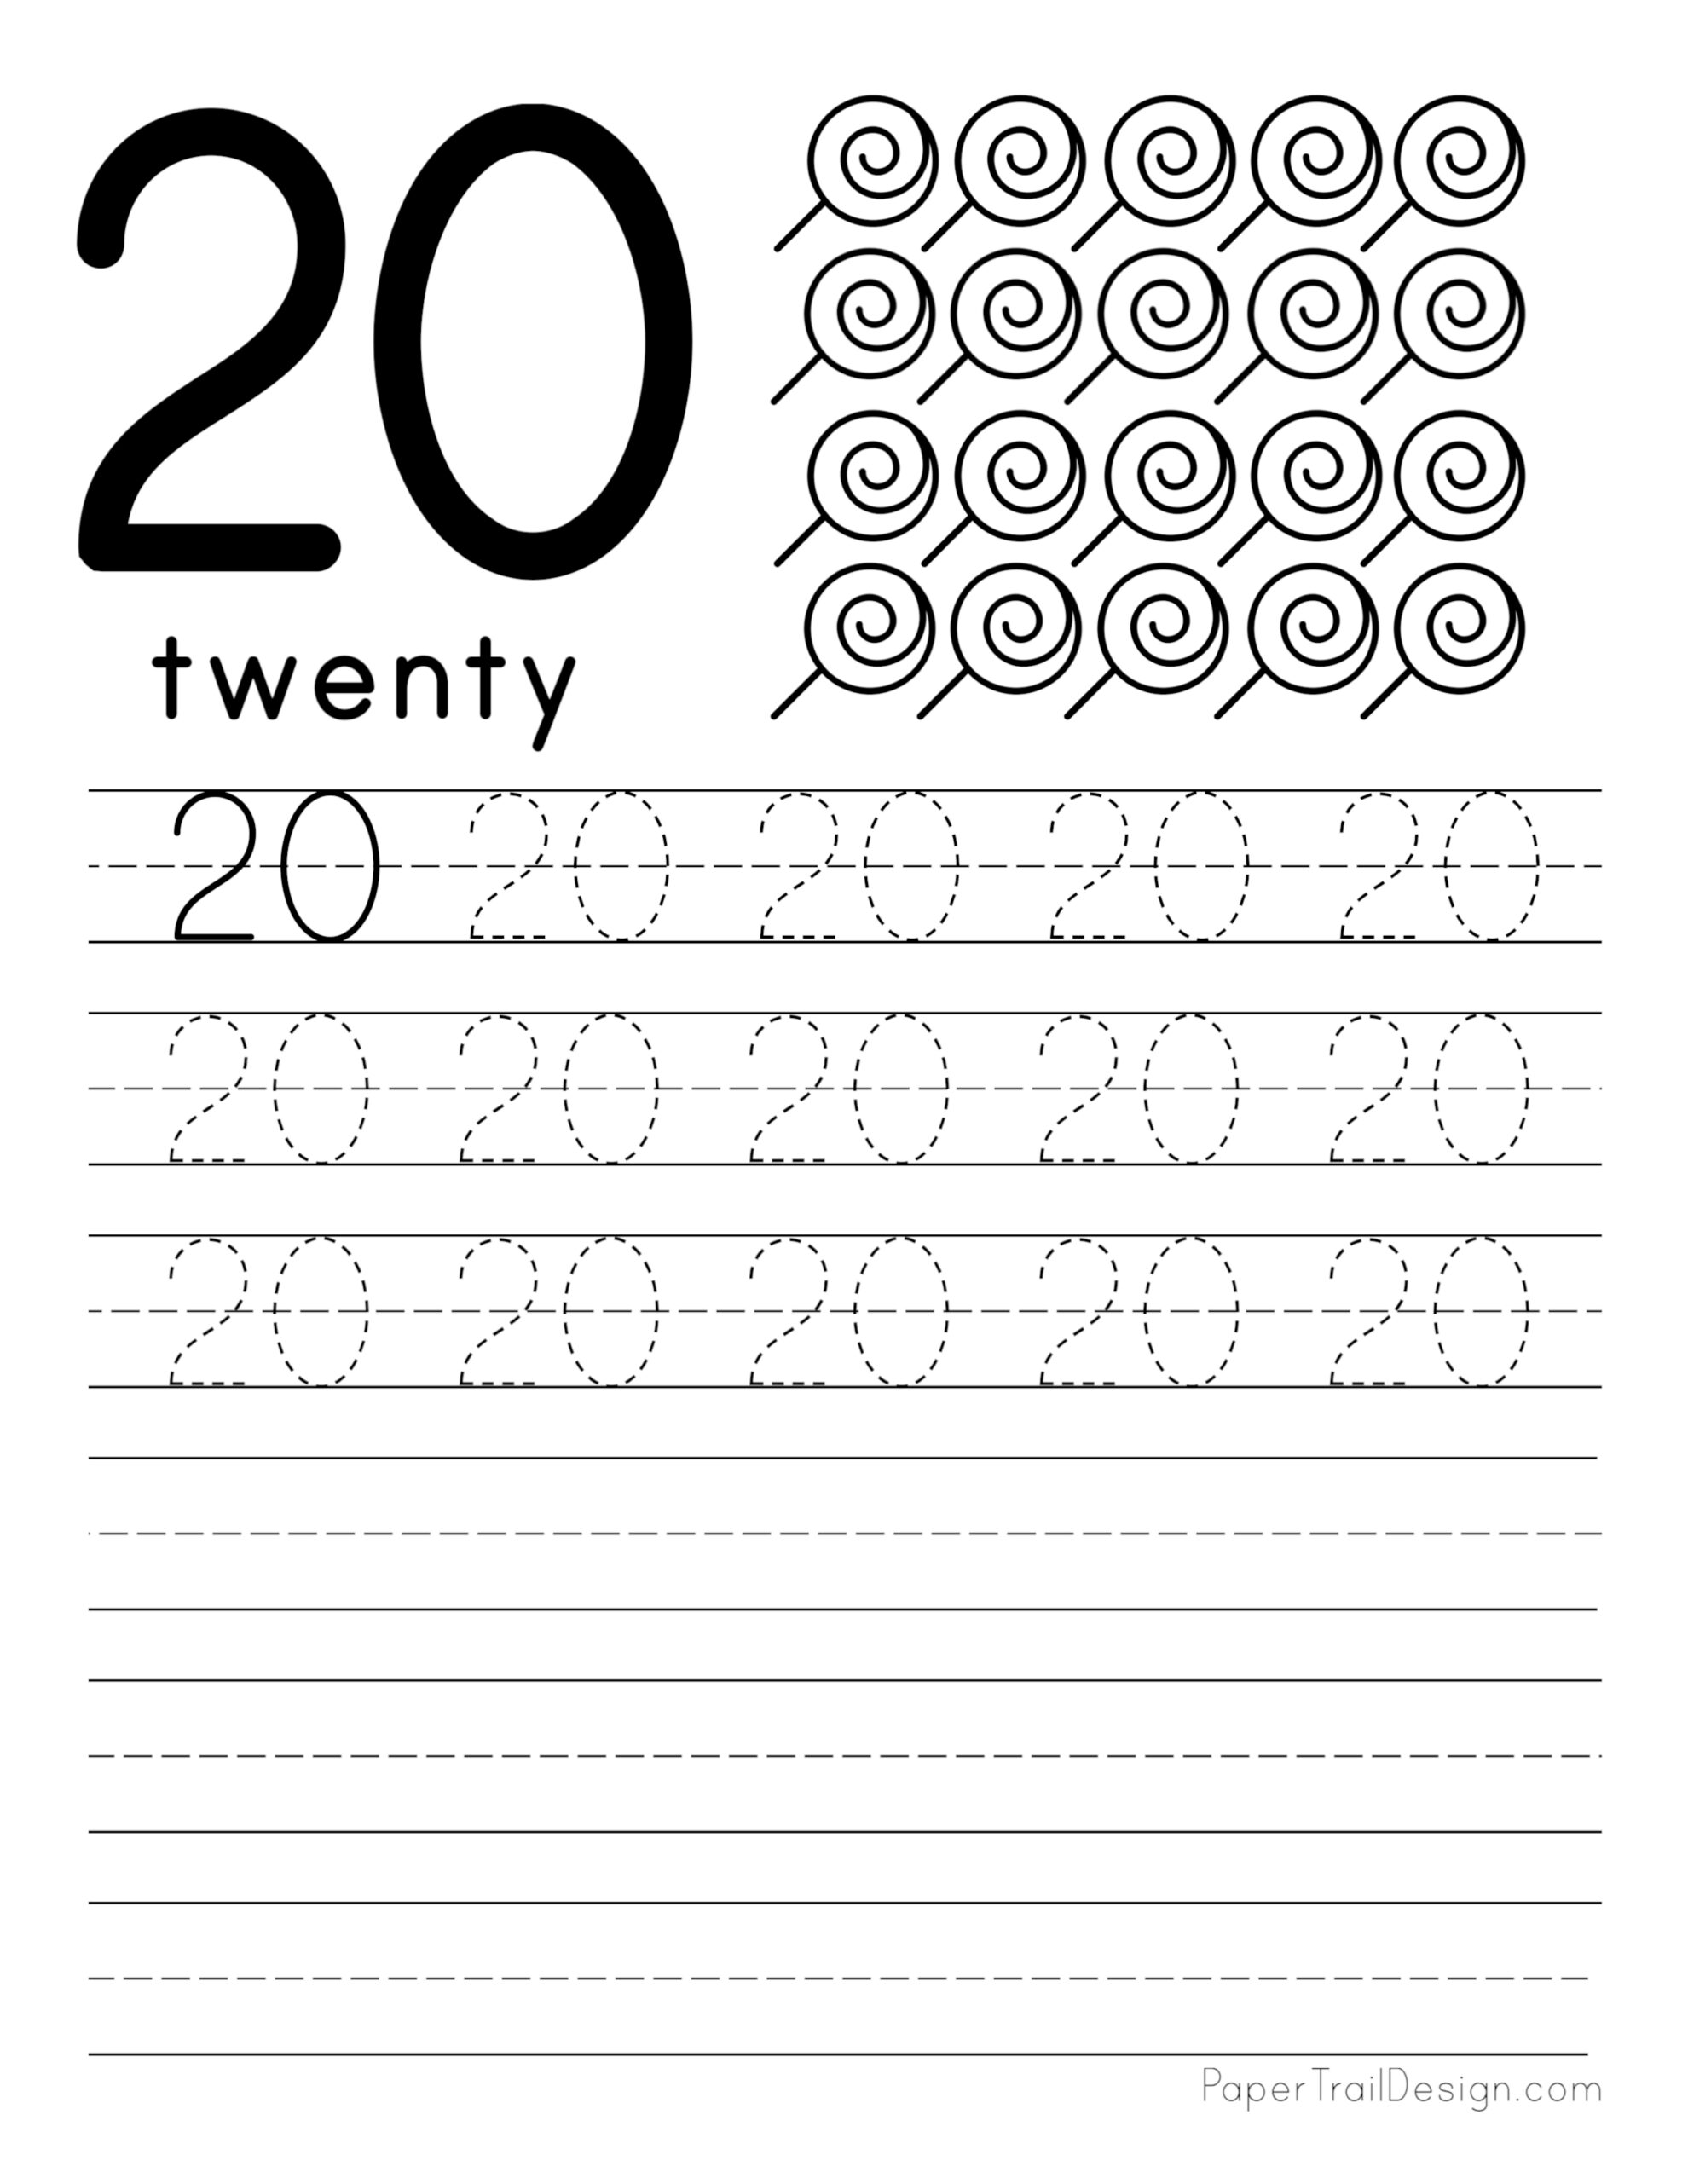 free-printable-worksheets-for-kids-tracing-numbers-1-20-worksheets-printable-1-to-20-rectangle